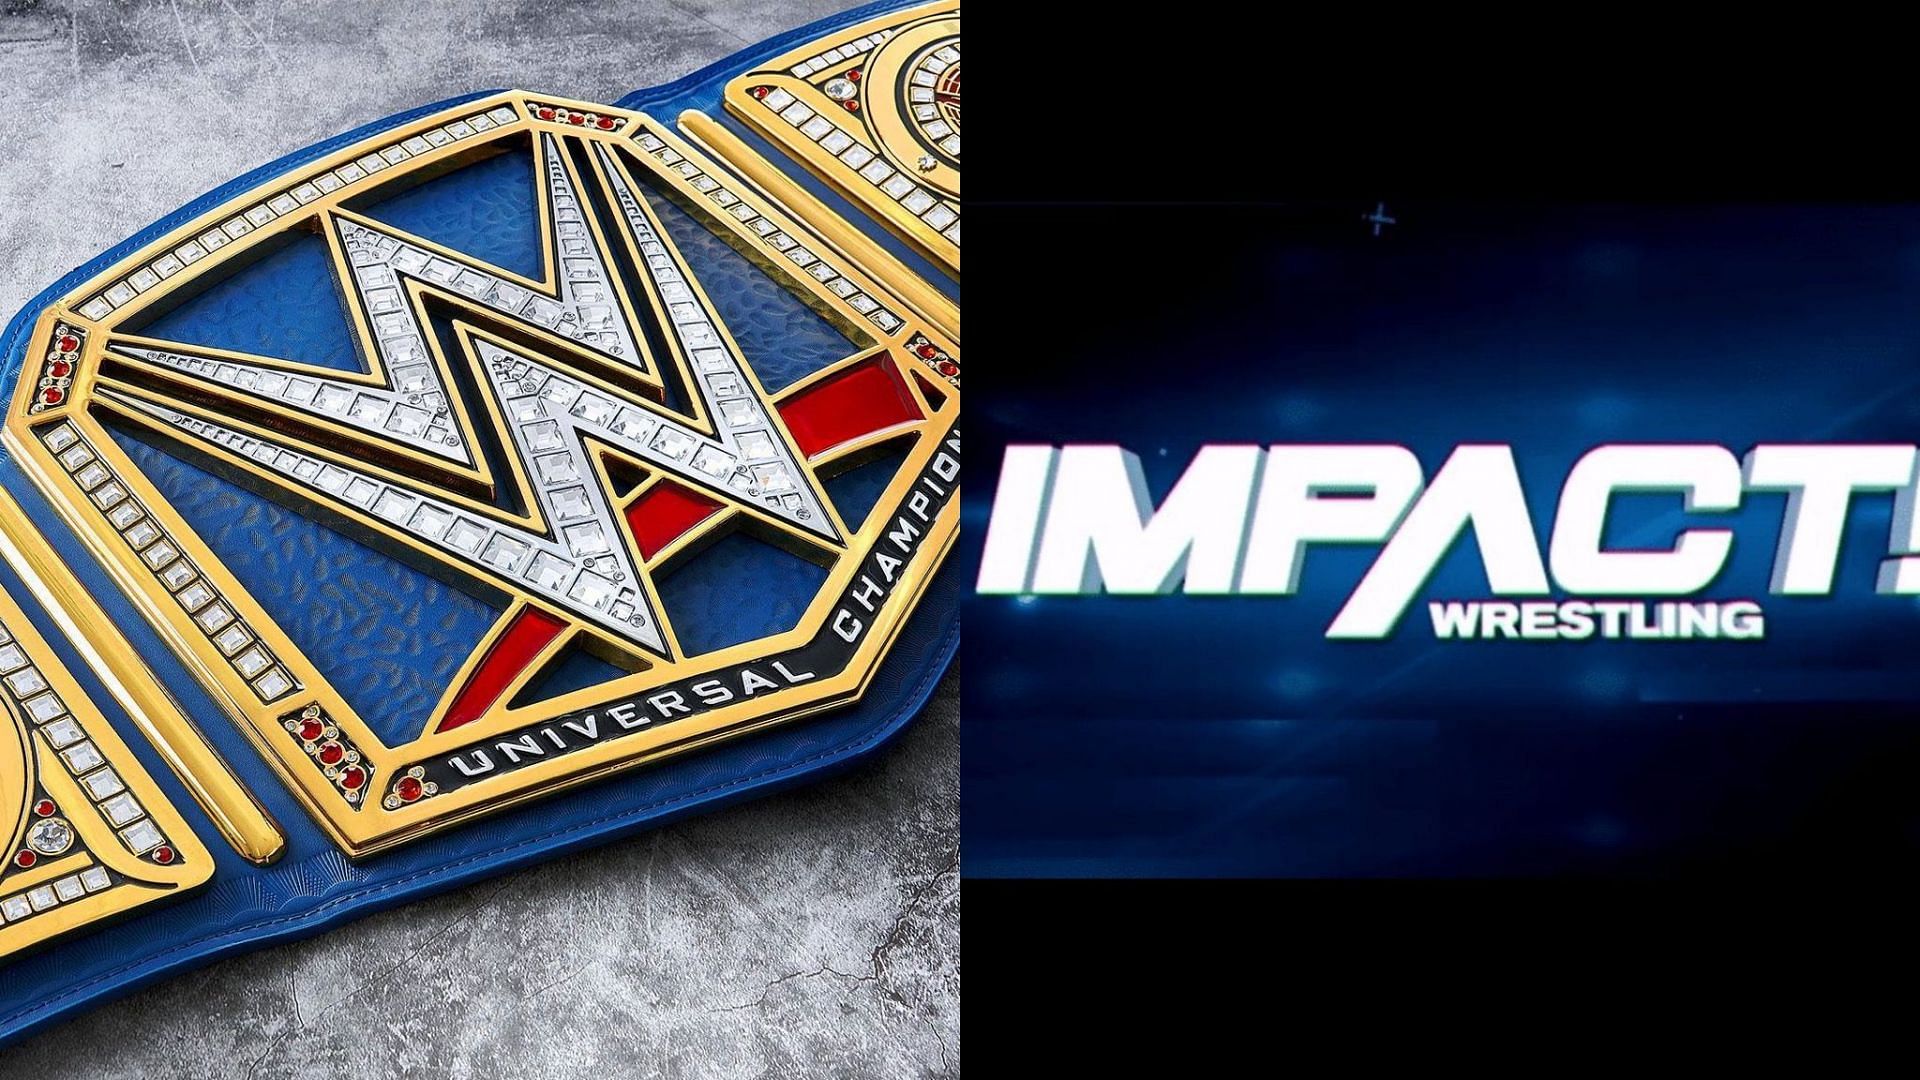 WWE Universal Championship (Left) and IMPACT Wrestling logo (Right)